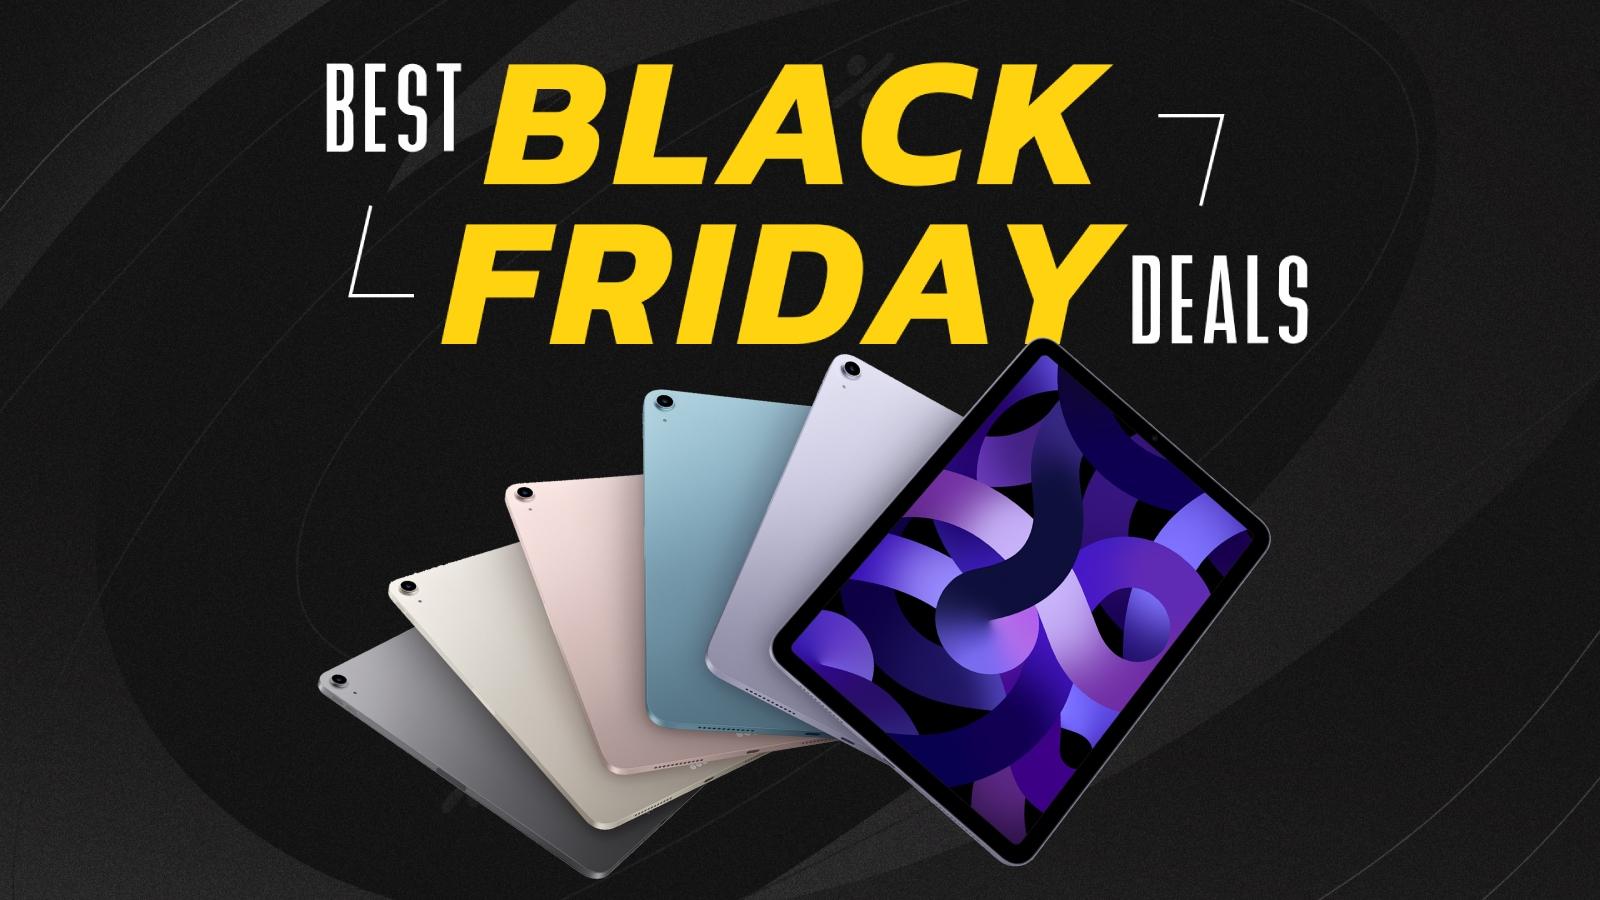 Multiple iPad Airs in different colors on Black Friday background with yellow letters